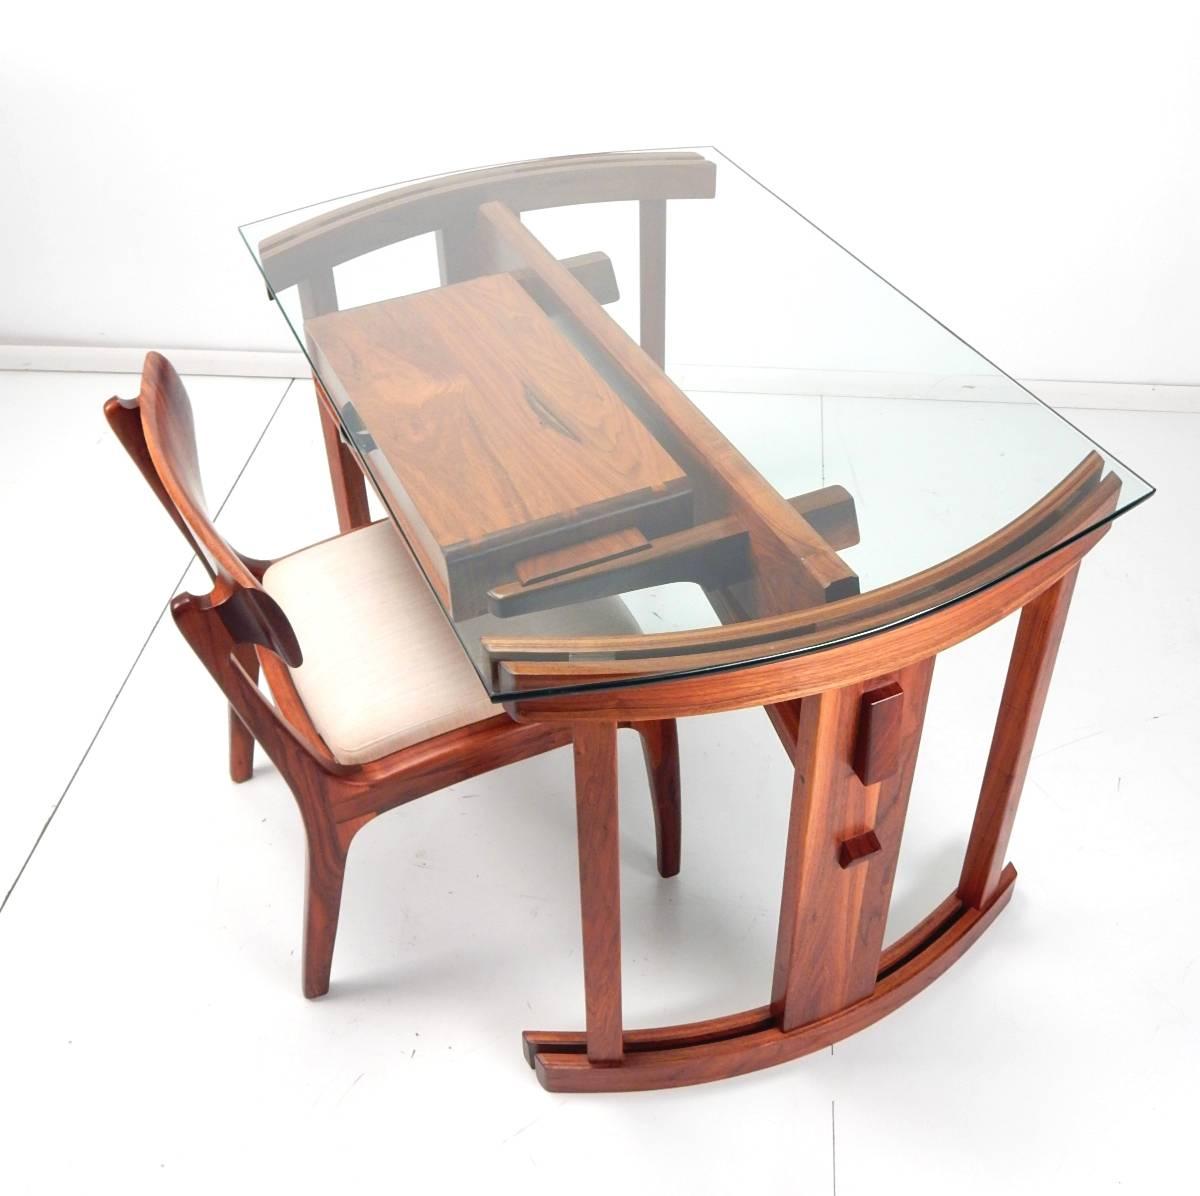 Magnificent custom hardwood desk and chair by furniture sculptor Randy Baber of Laguna Beach California.
Single drawer with form fitted glass top.
Amazing craftsmanship in every detail makes this an heirloom piece of functional art. 
Both pieces